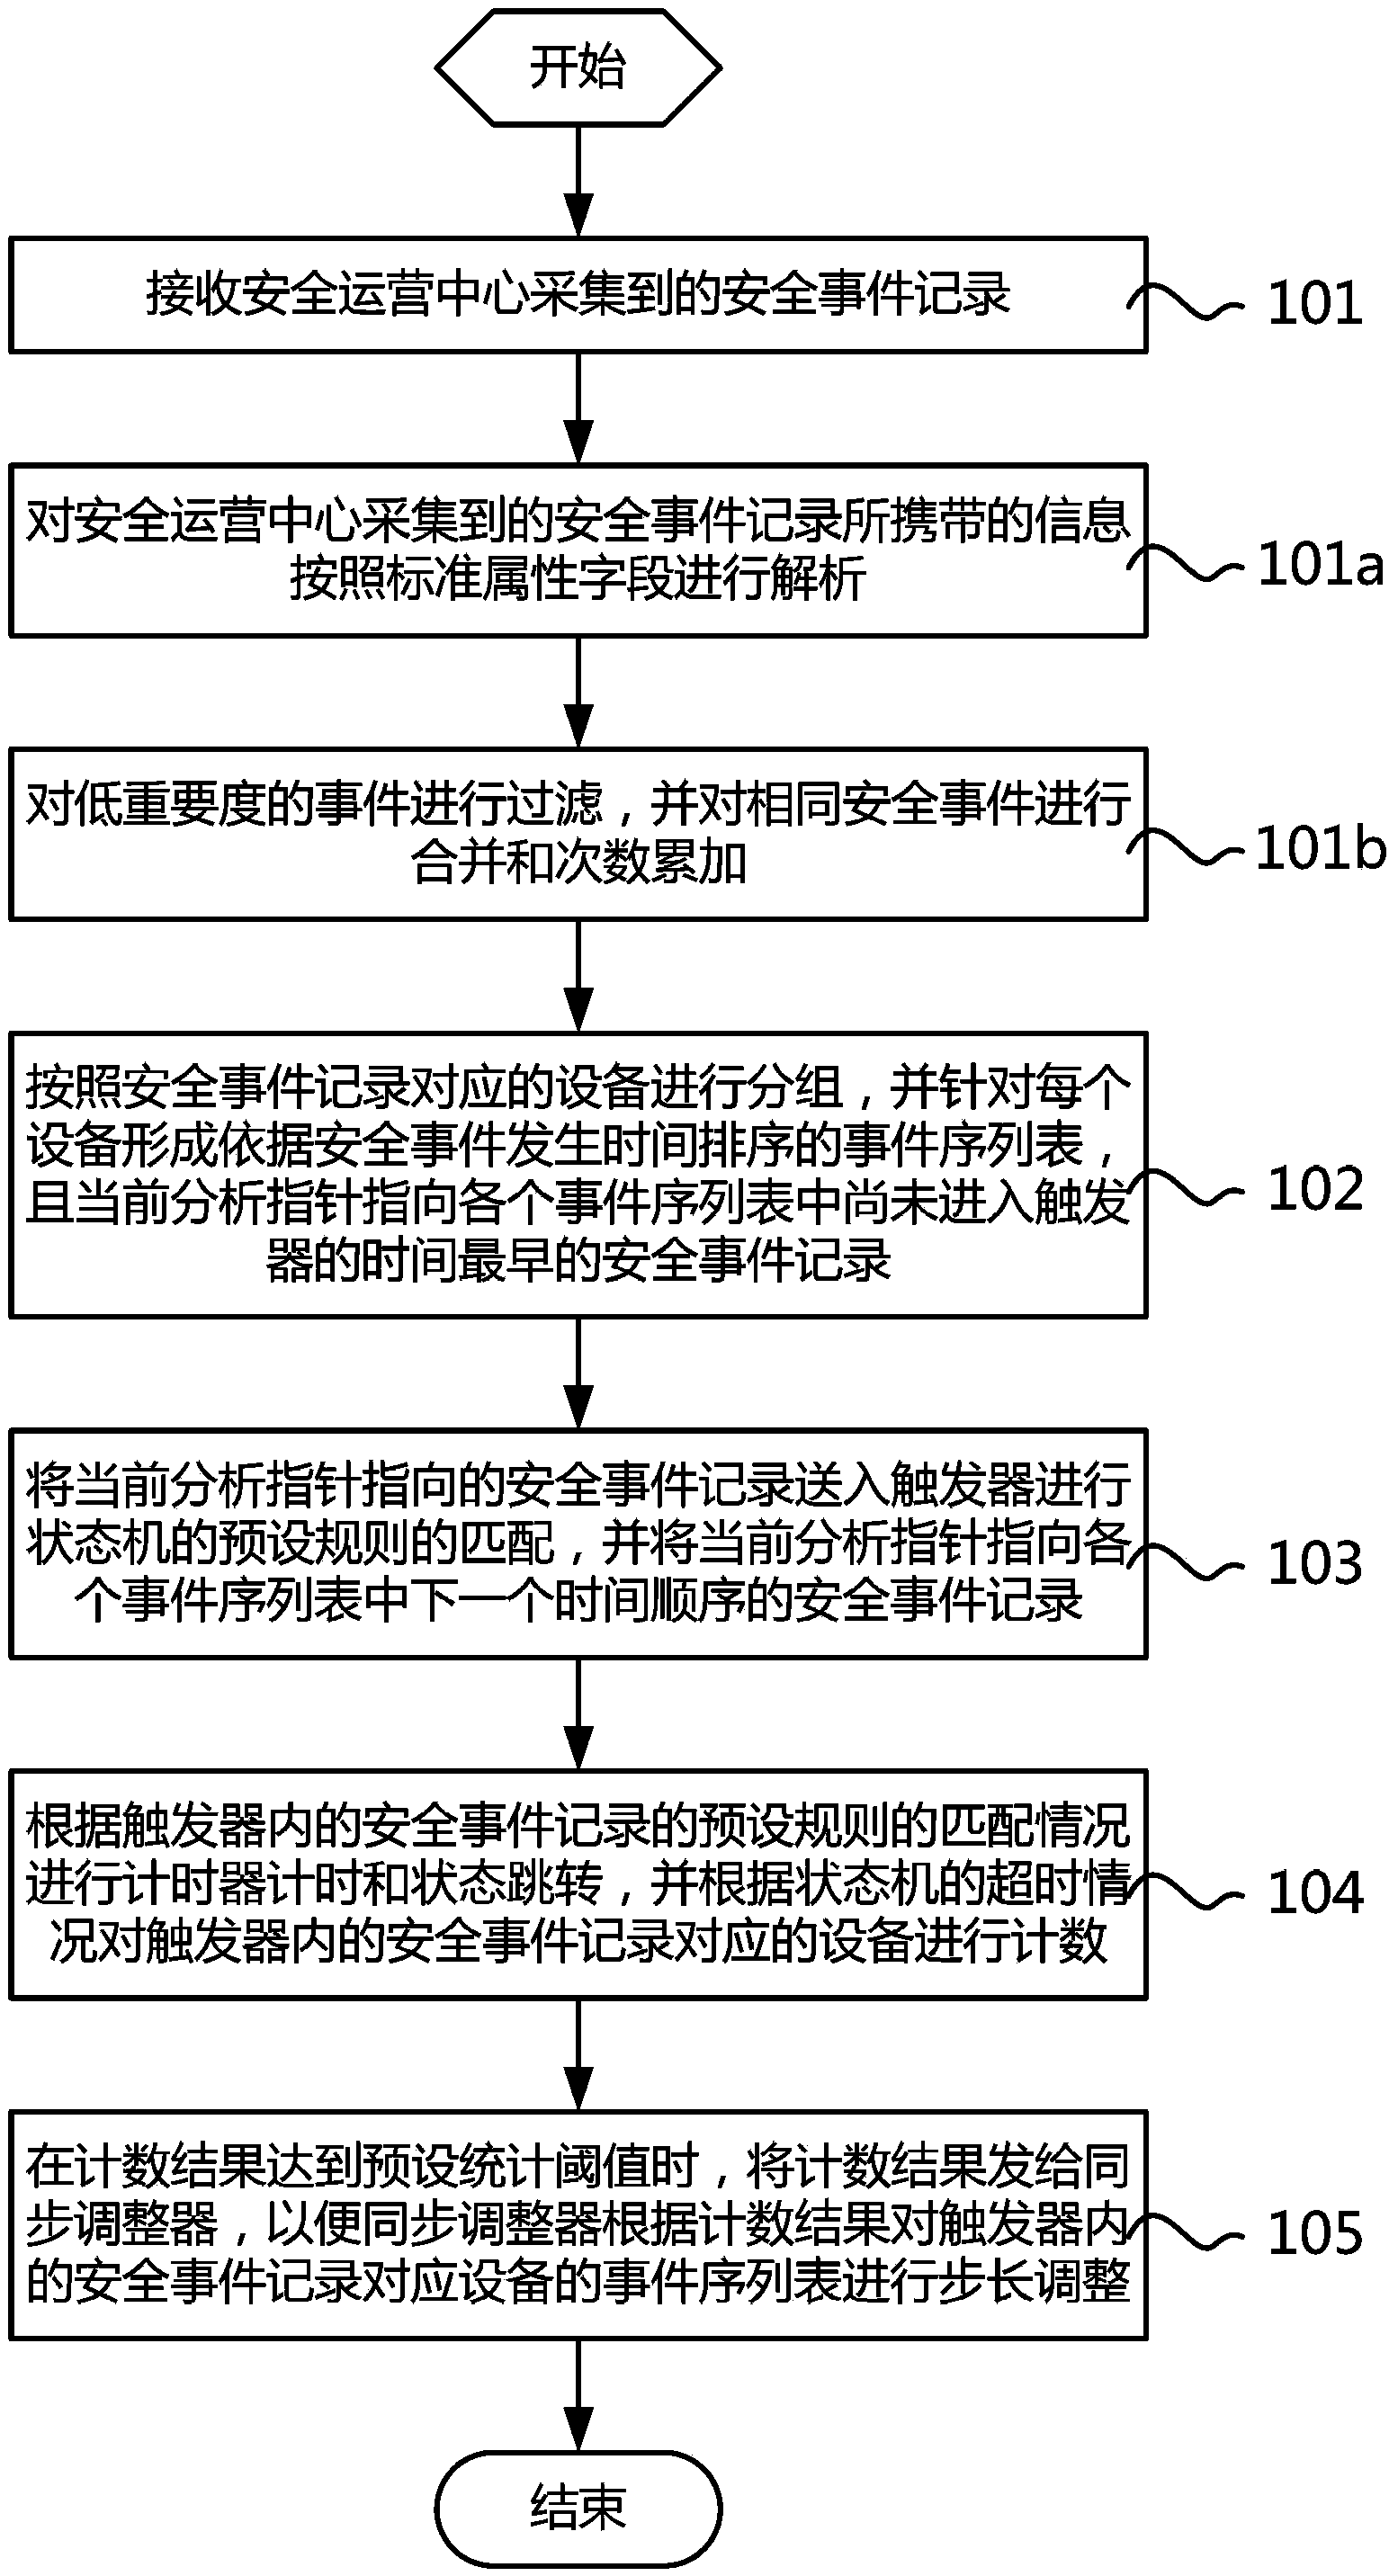 Method and system for correlation analysis of security events